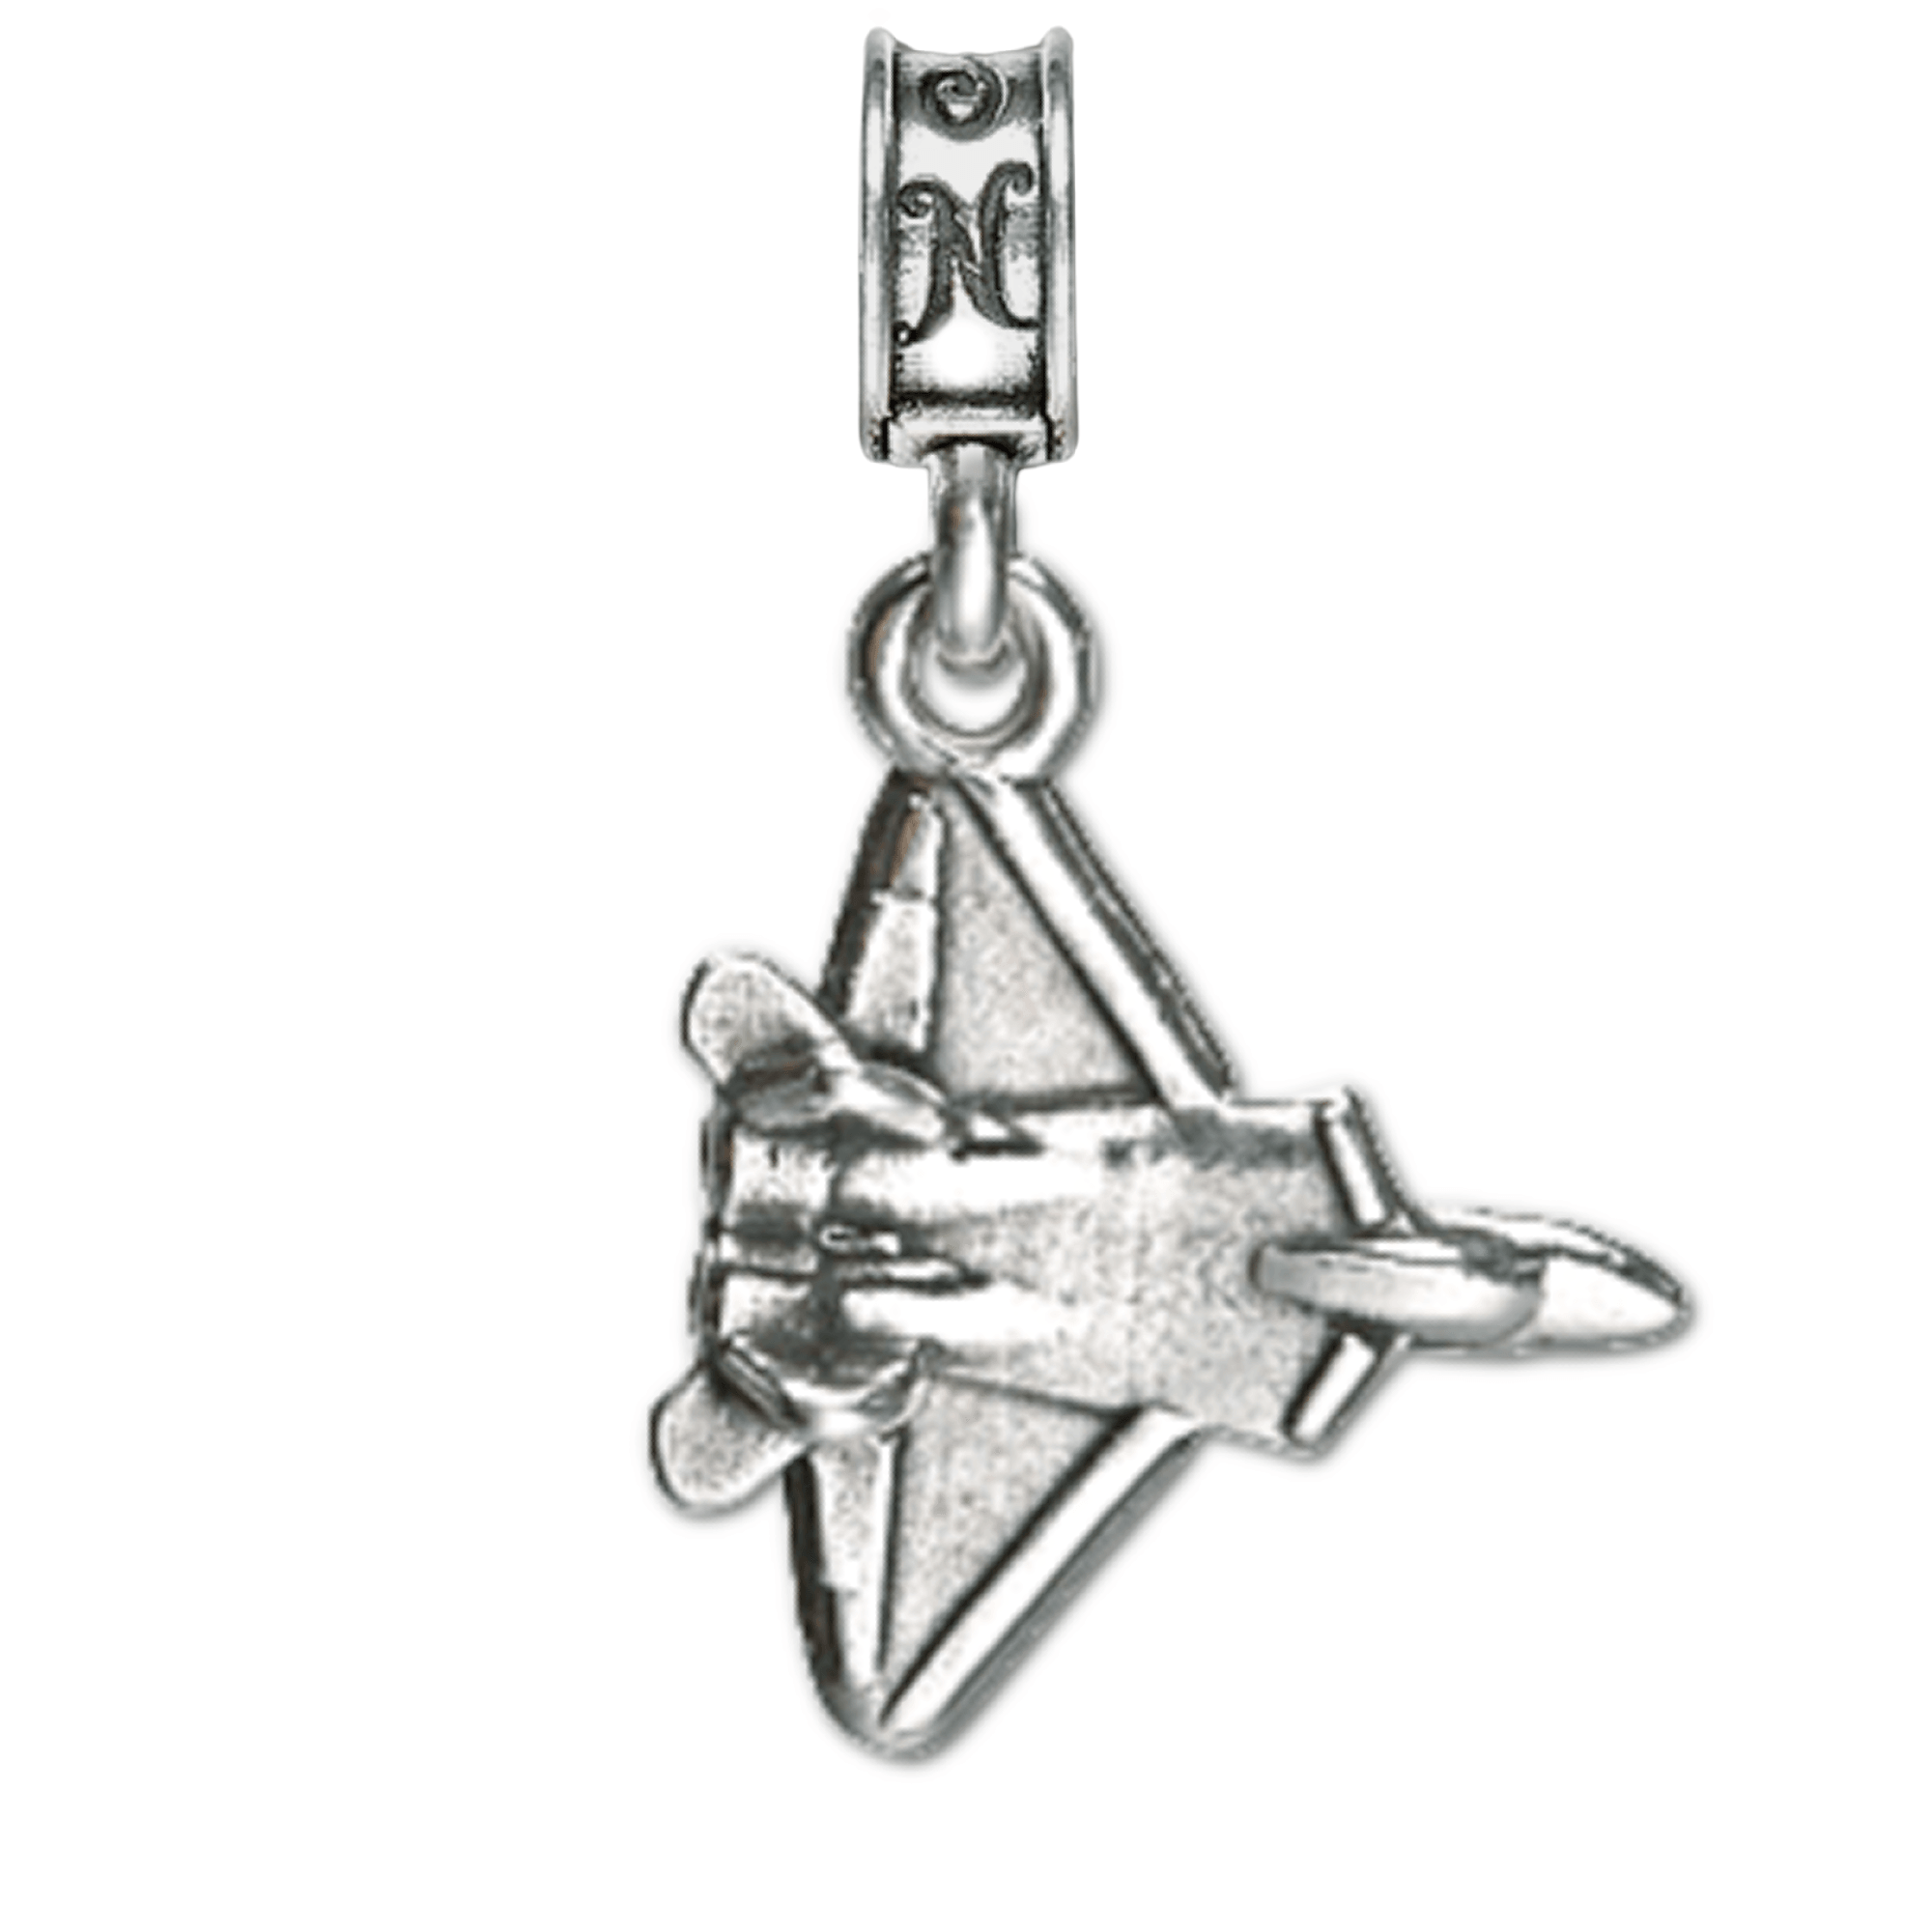 Military Jewelry, Military Charms, Military Gifts, Military Aviation, F-22